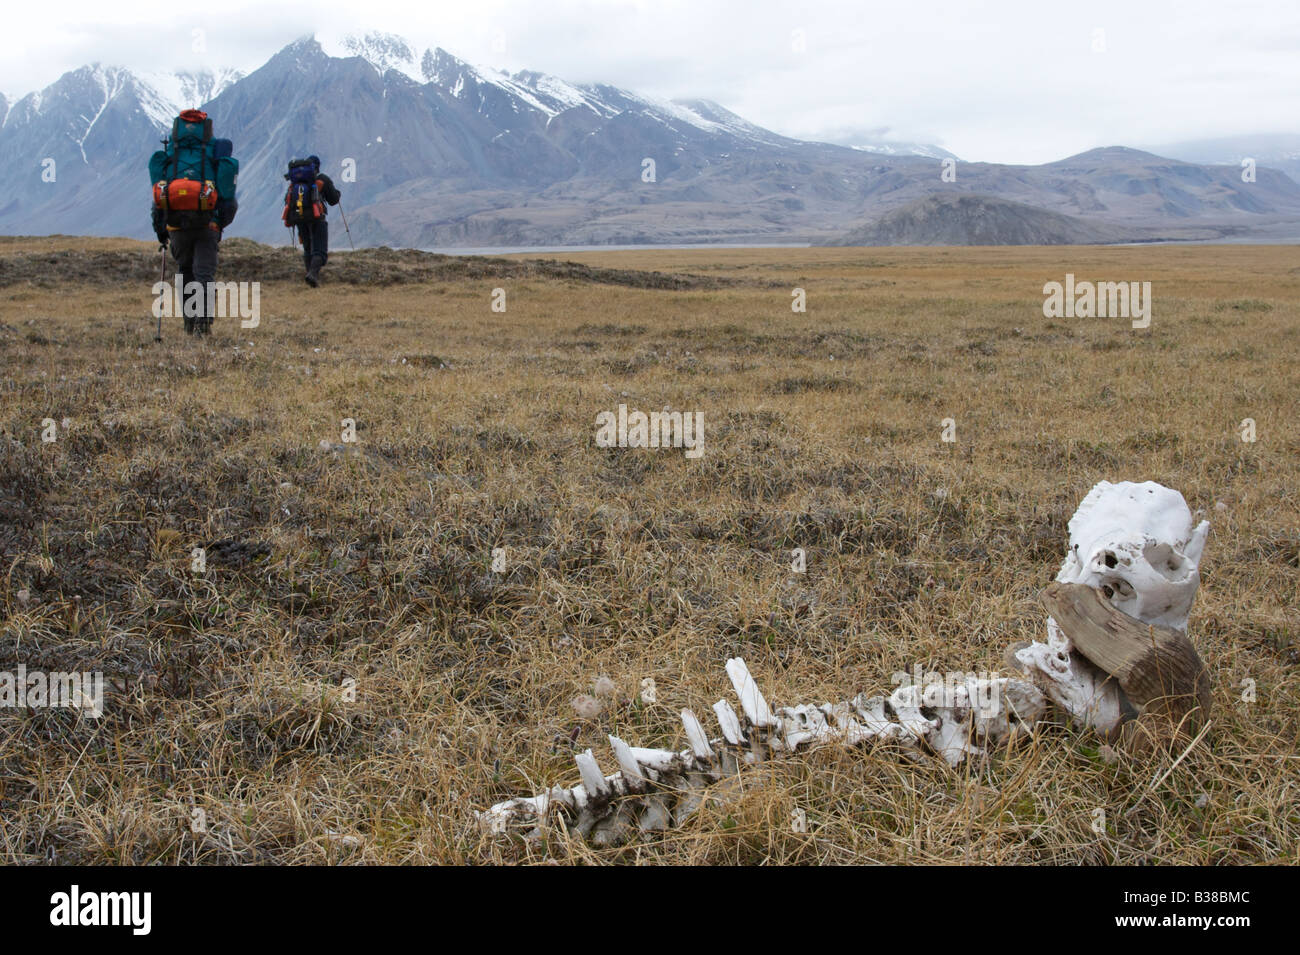 Hikers passing by a muskox skeleton in the barren tundra of high arctic on Ellesmere Island, Nunavut Canada. Stock Photo